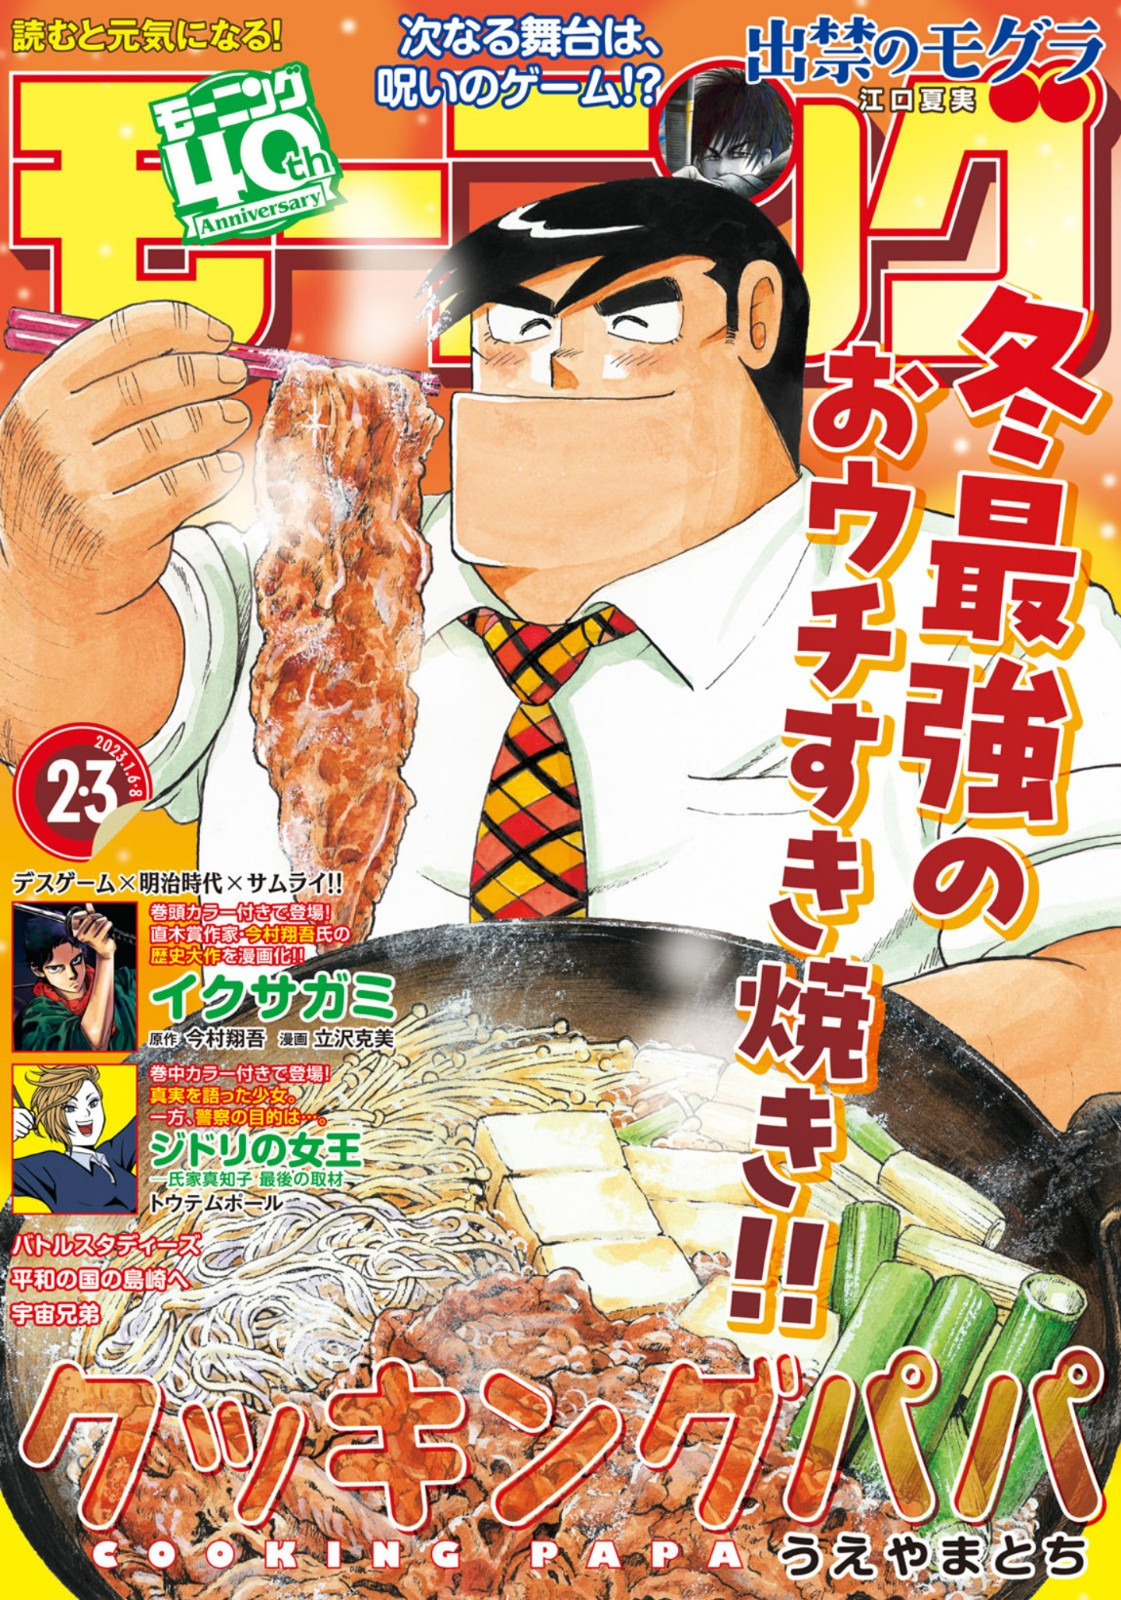 Weekly Morning - 週刊モーニング - Chapter 2023-02-03 - Page 1